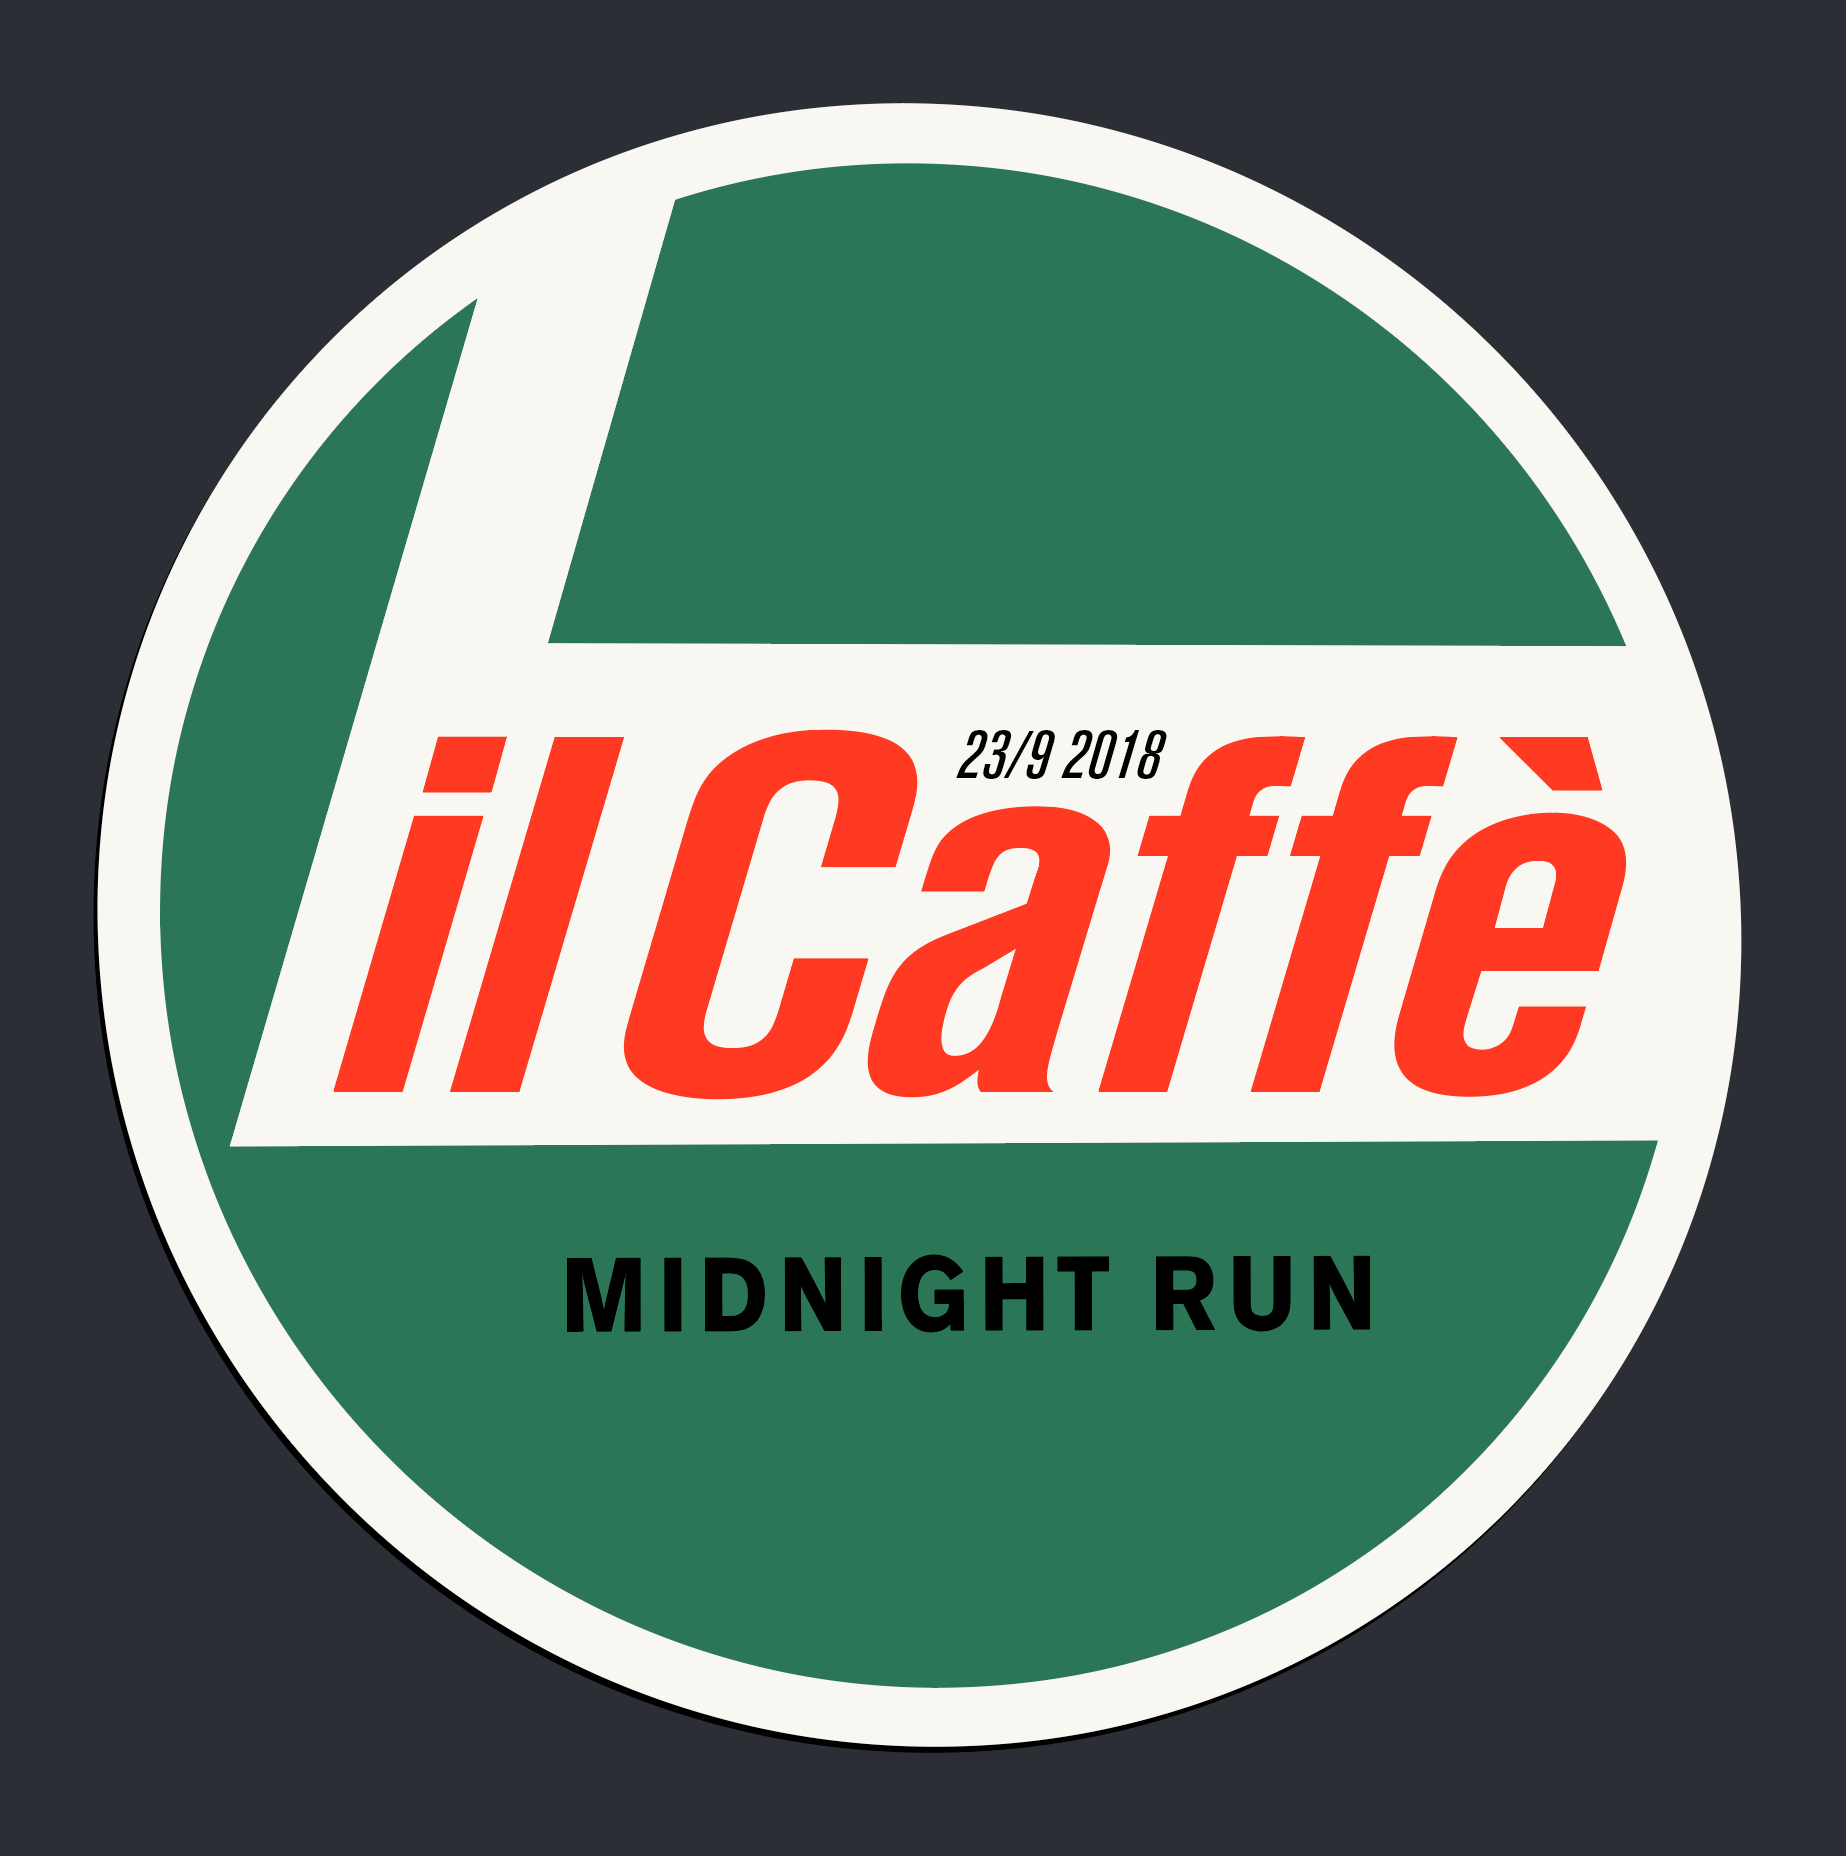 ilcaffe.png